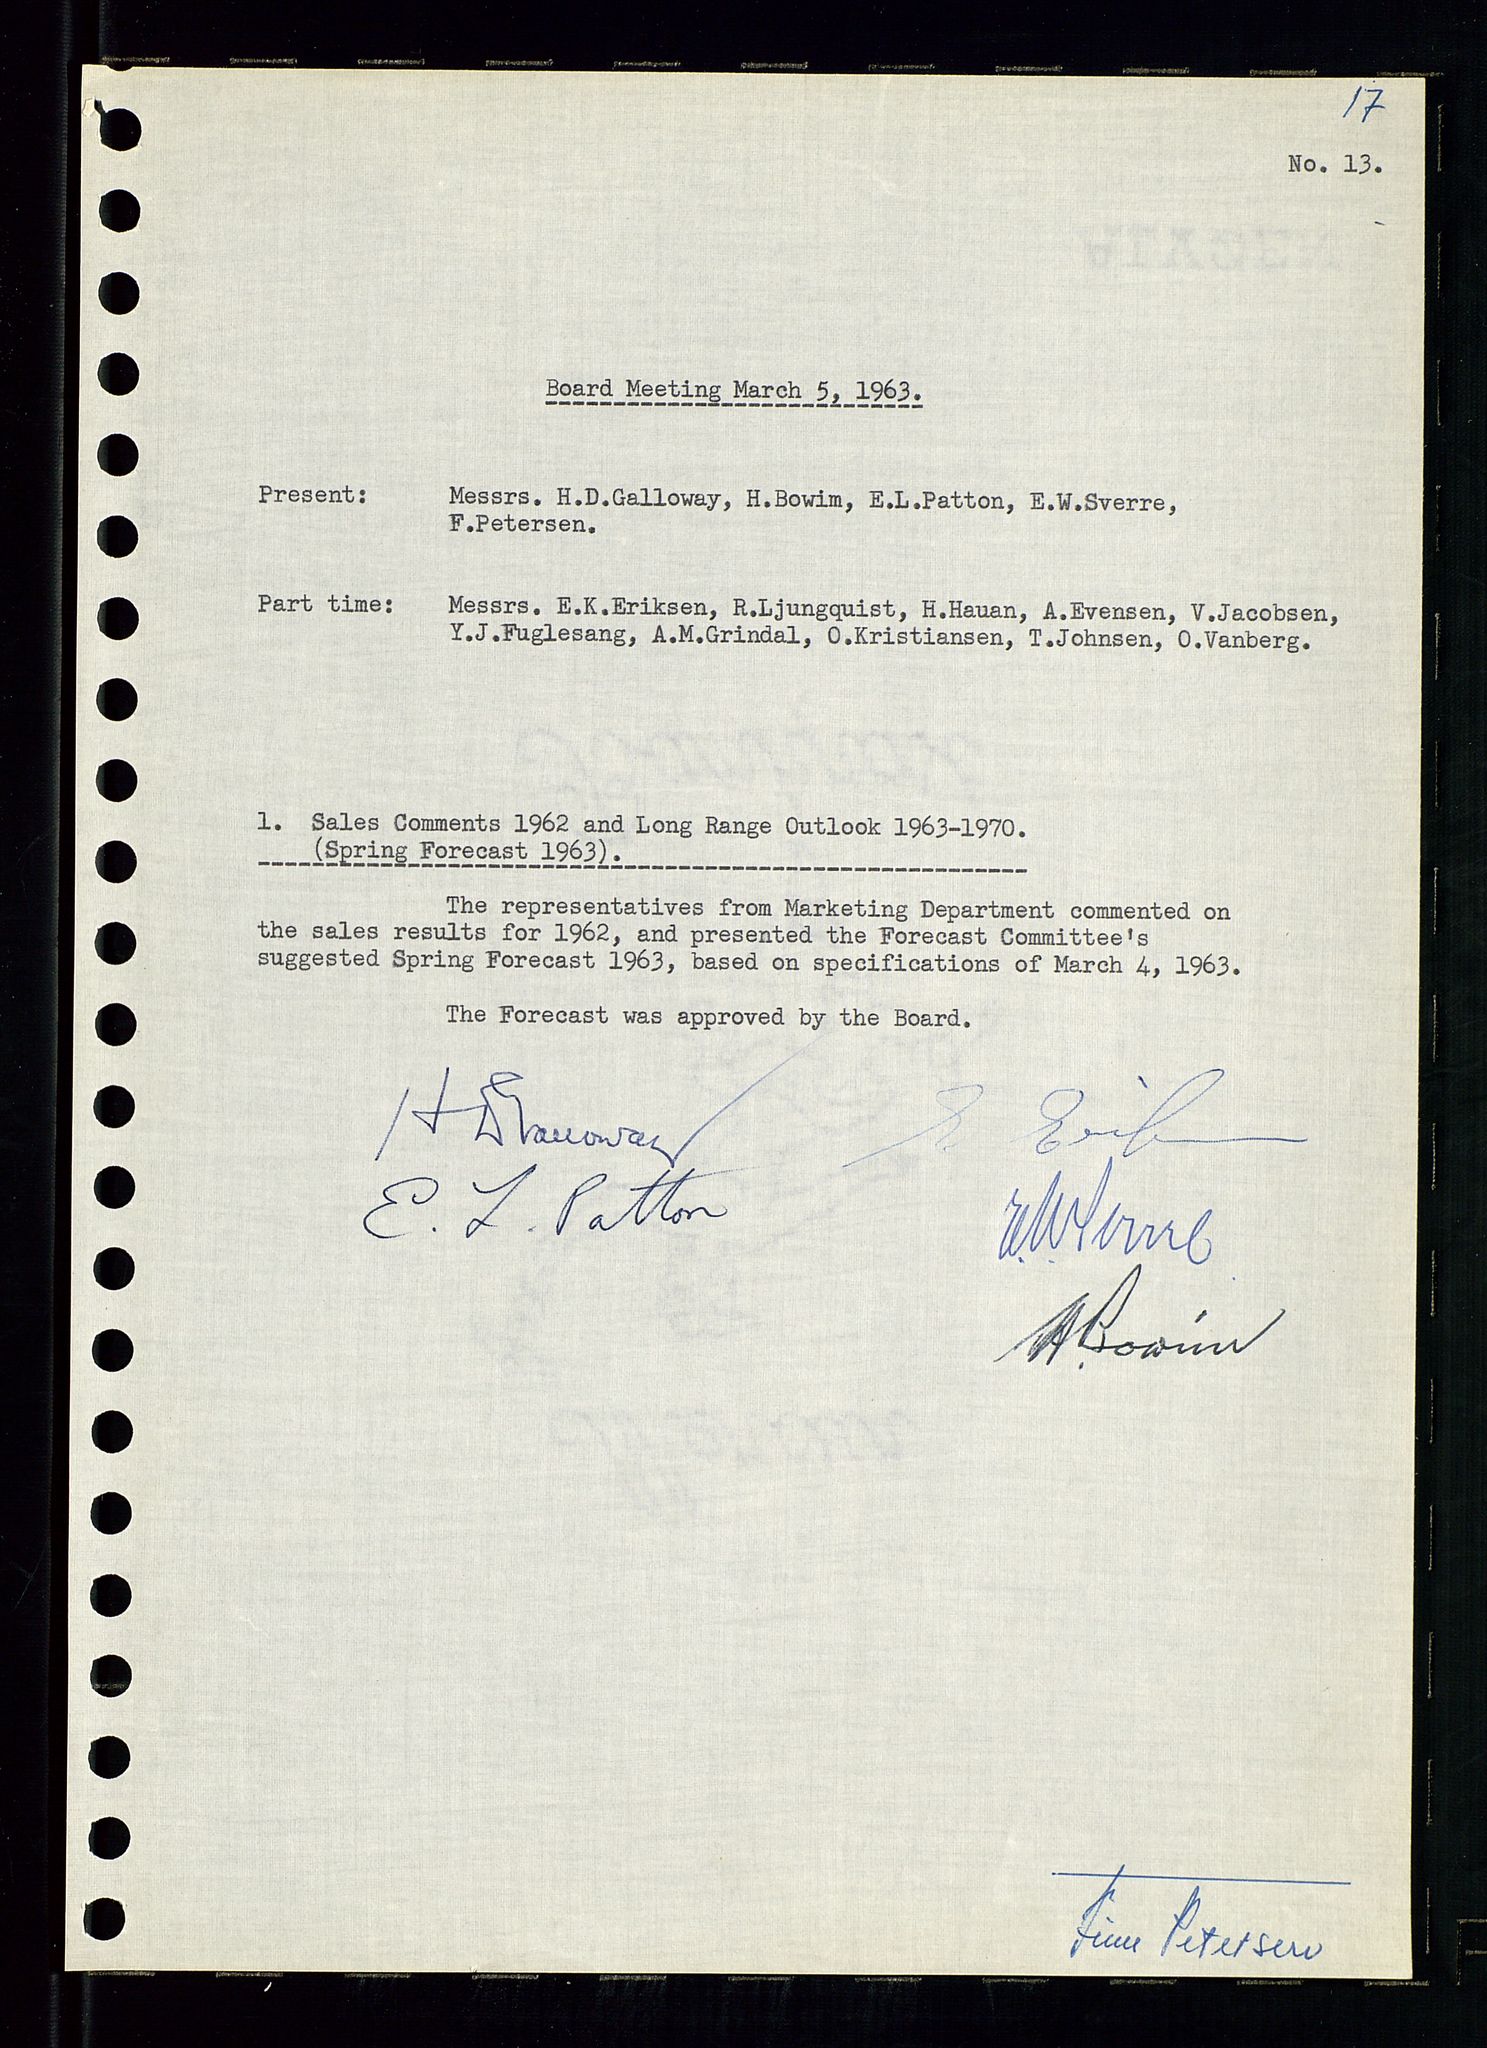 Pa 0982 - Esso Norge A/S, SAST/A-100448/A/Aa/L0001/0004: Den administrerende direksjon Board minutes (styrereferater) / Den administrerende direksjon Board minutes (styrereferater), 1963-1964, s. 245